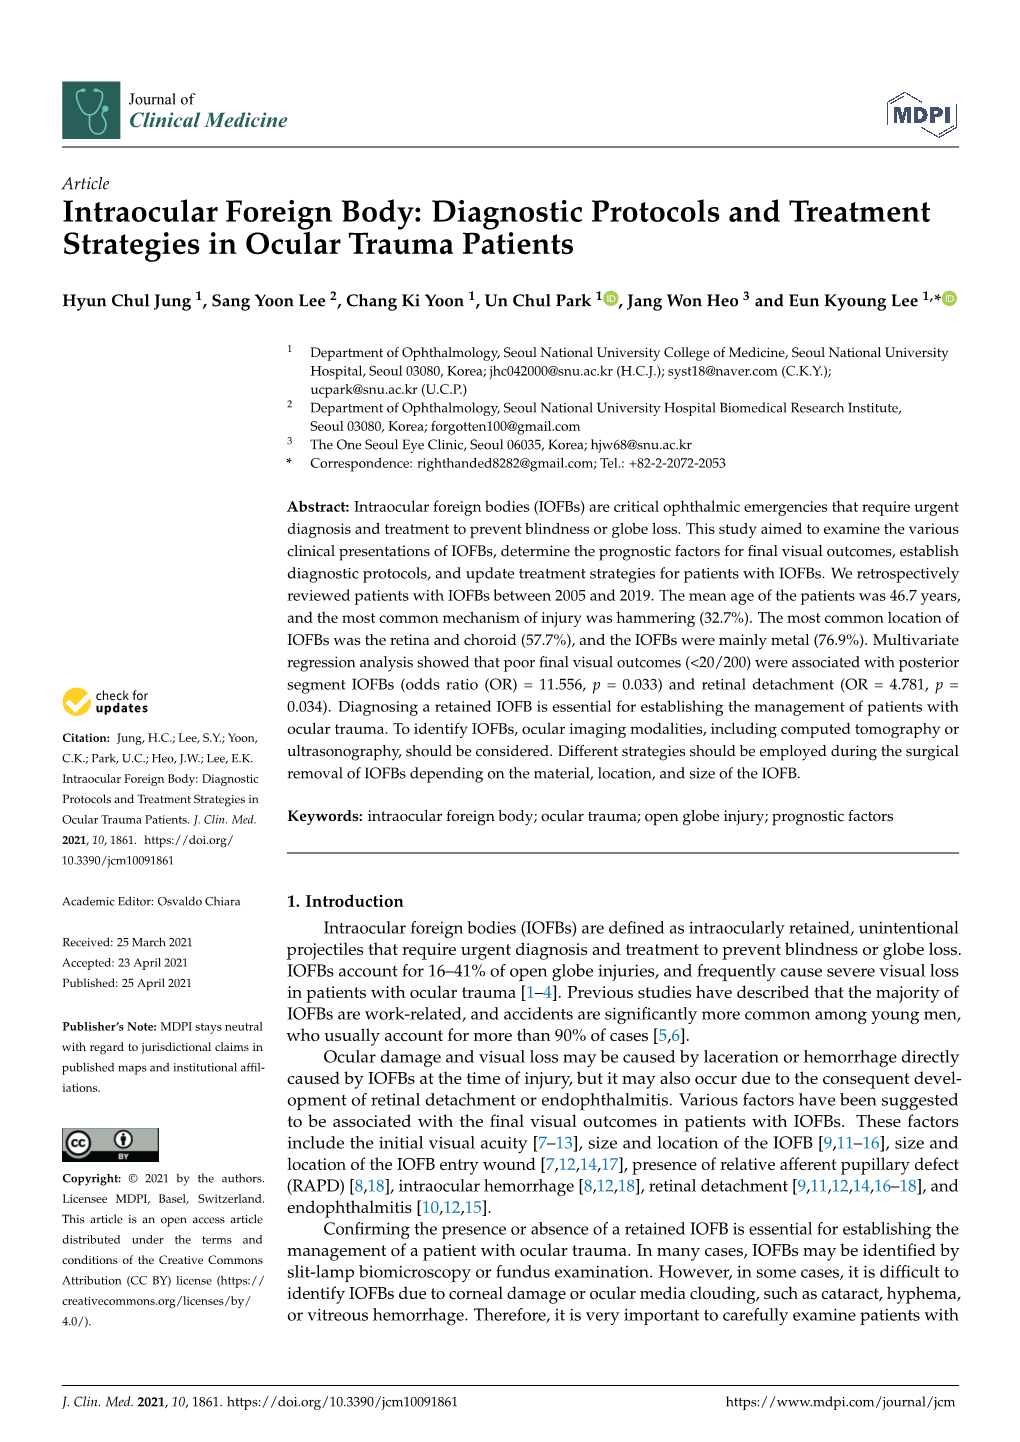 Intraocular Foreign Body: Diagnostic Protocols and Treatment Strategies in Ocular Trauma Patients